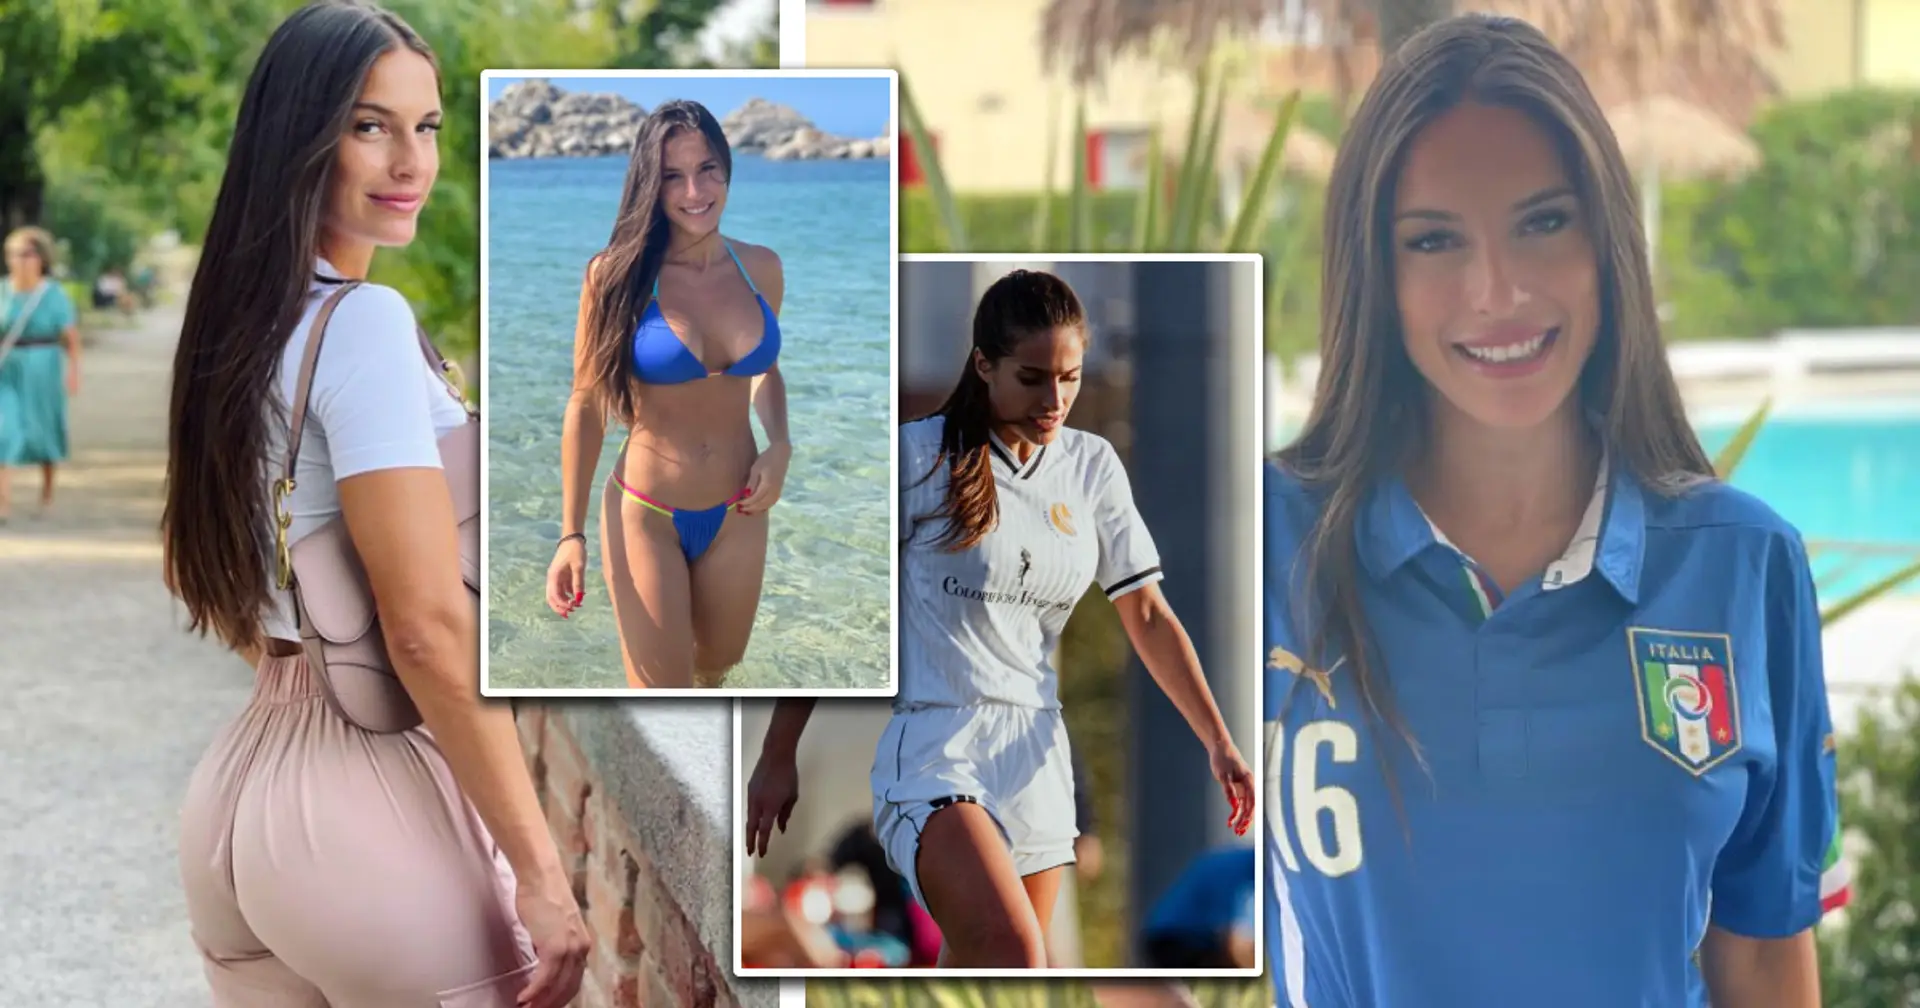 Meet Italy’s most beautiful footballer who loves bikini beach snaps and has pro player husband